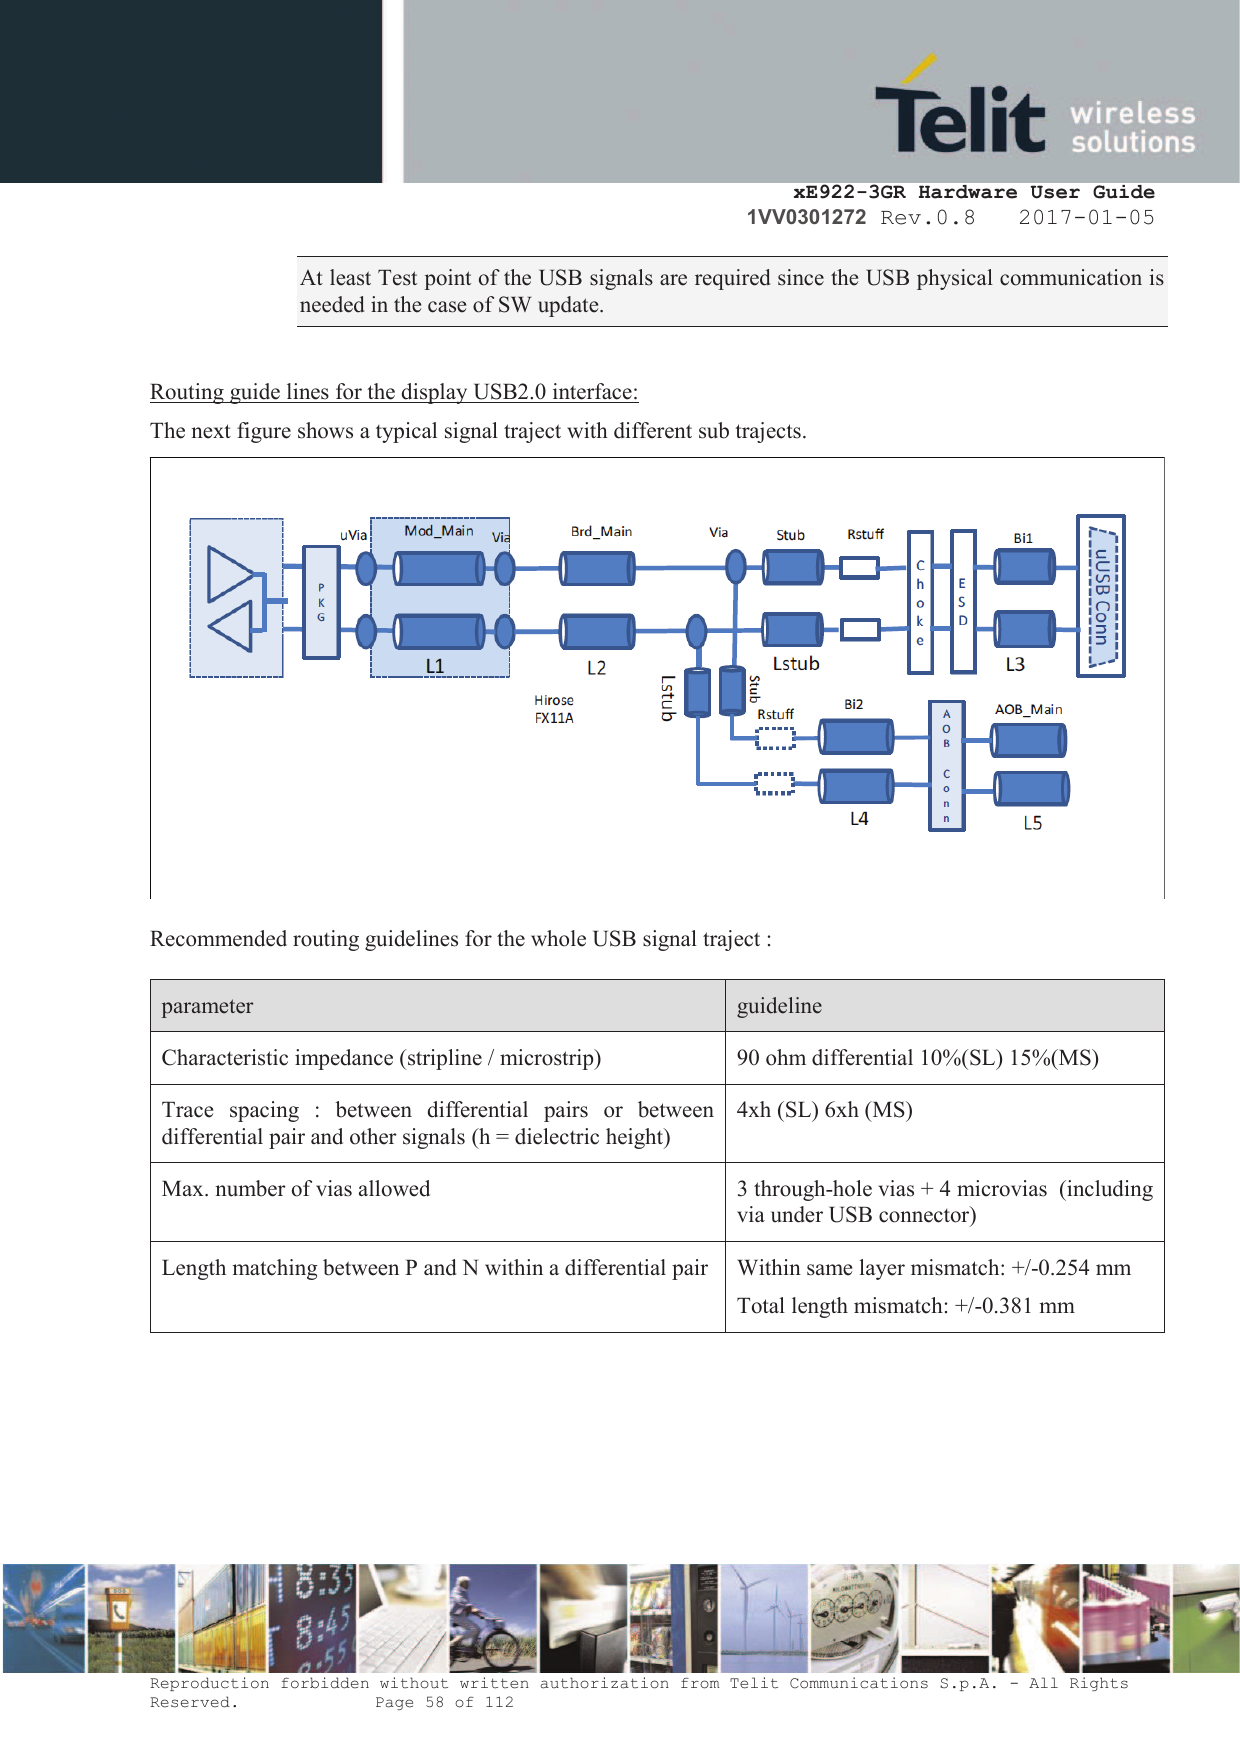     xE922-3GR Hardware User Guide 1VV0301272 Rev.0.8   2017-01-05 Reproduction forbidden without written authorization from Telit Communications S.p.A. - All Rights Reserved.    Page 58 of 112  At least Test point of the USB signals are required since the USB physical communication is needed in the case of SW update.  Routing guide lines for the display USB2.0 interface: The next figure shows a typical signal traject with different sub trajects.   Recommended routing guidelines for the whole USB signal traject :  parameter  guideline Characteristic impedance (stripline / microstrip) 90 ohm differential 10%(SL) 15%(MS) Trace  spacing  :  between  differential  pairs  or  between differential pair and other signals (h = dielectric height) 4xh (SL) 6xh (MS) Max. number of vias allowed 3 through-hole vias + 4 microvias  (including via under USB connector) Length matching between P and N within a differential pair Within same layer mismatch: +/-0.254 mm Total length mismatch: +/-0.381 mm       